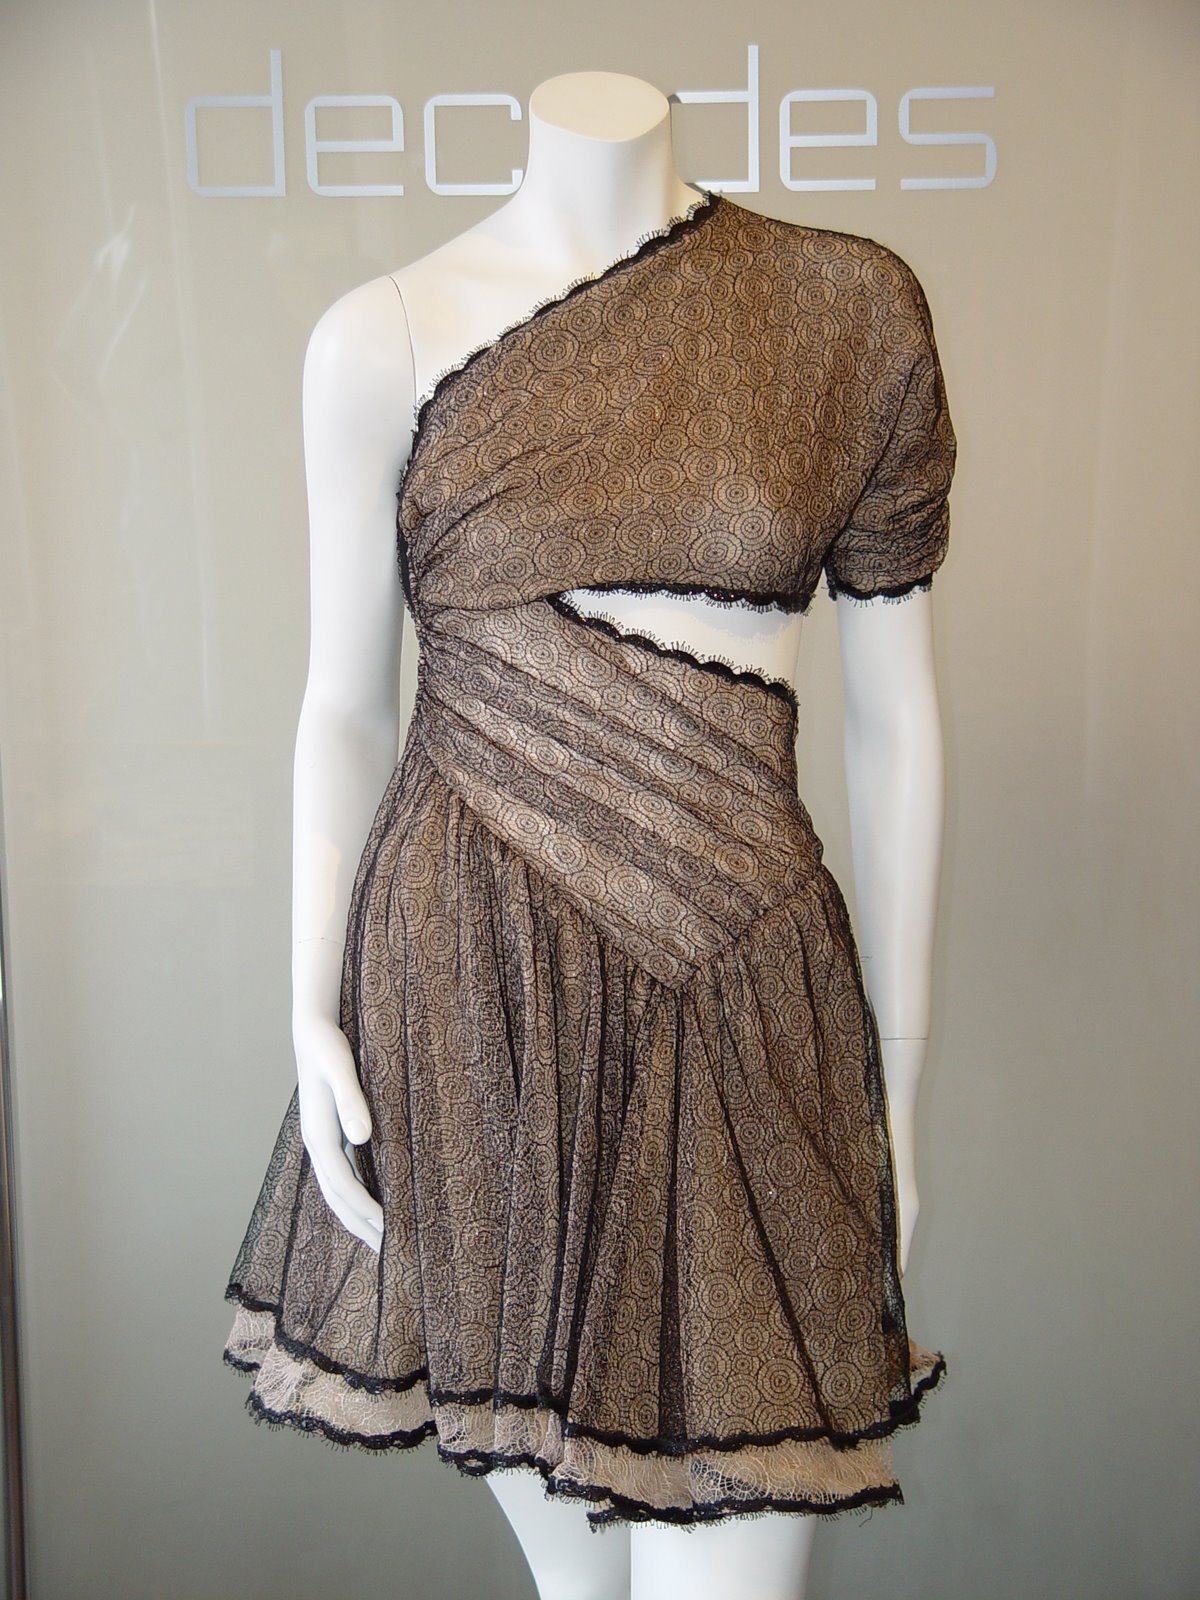 [GEOFFREY+BEENE+NUDE+CHIFFON+WITH+LACE+OVER+LAY+ONE+SHOULDER+CUT+OUT+DRESS+SIZE+4+C+EARLY+90S.JPG.JPG]